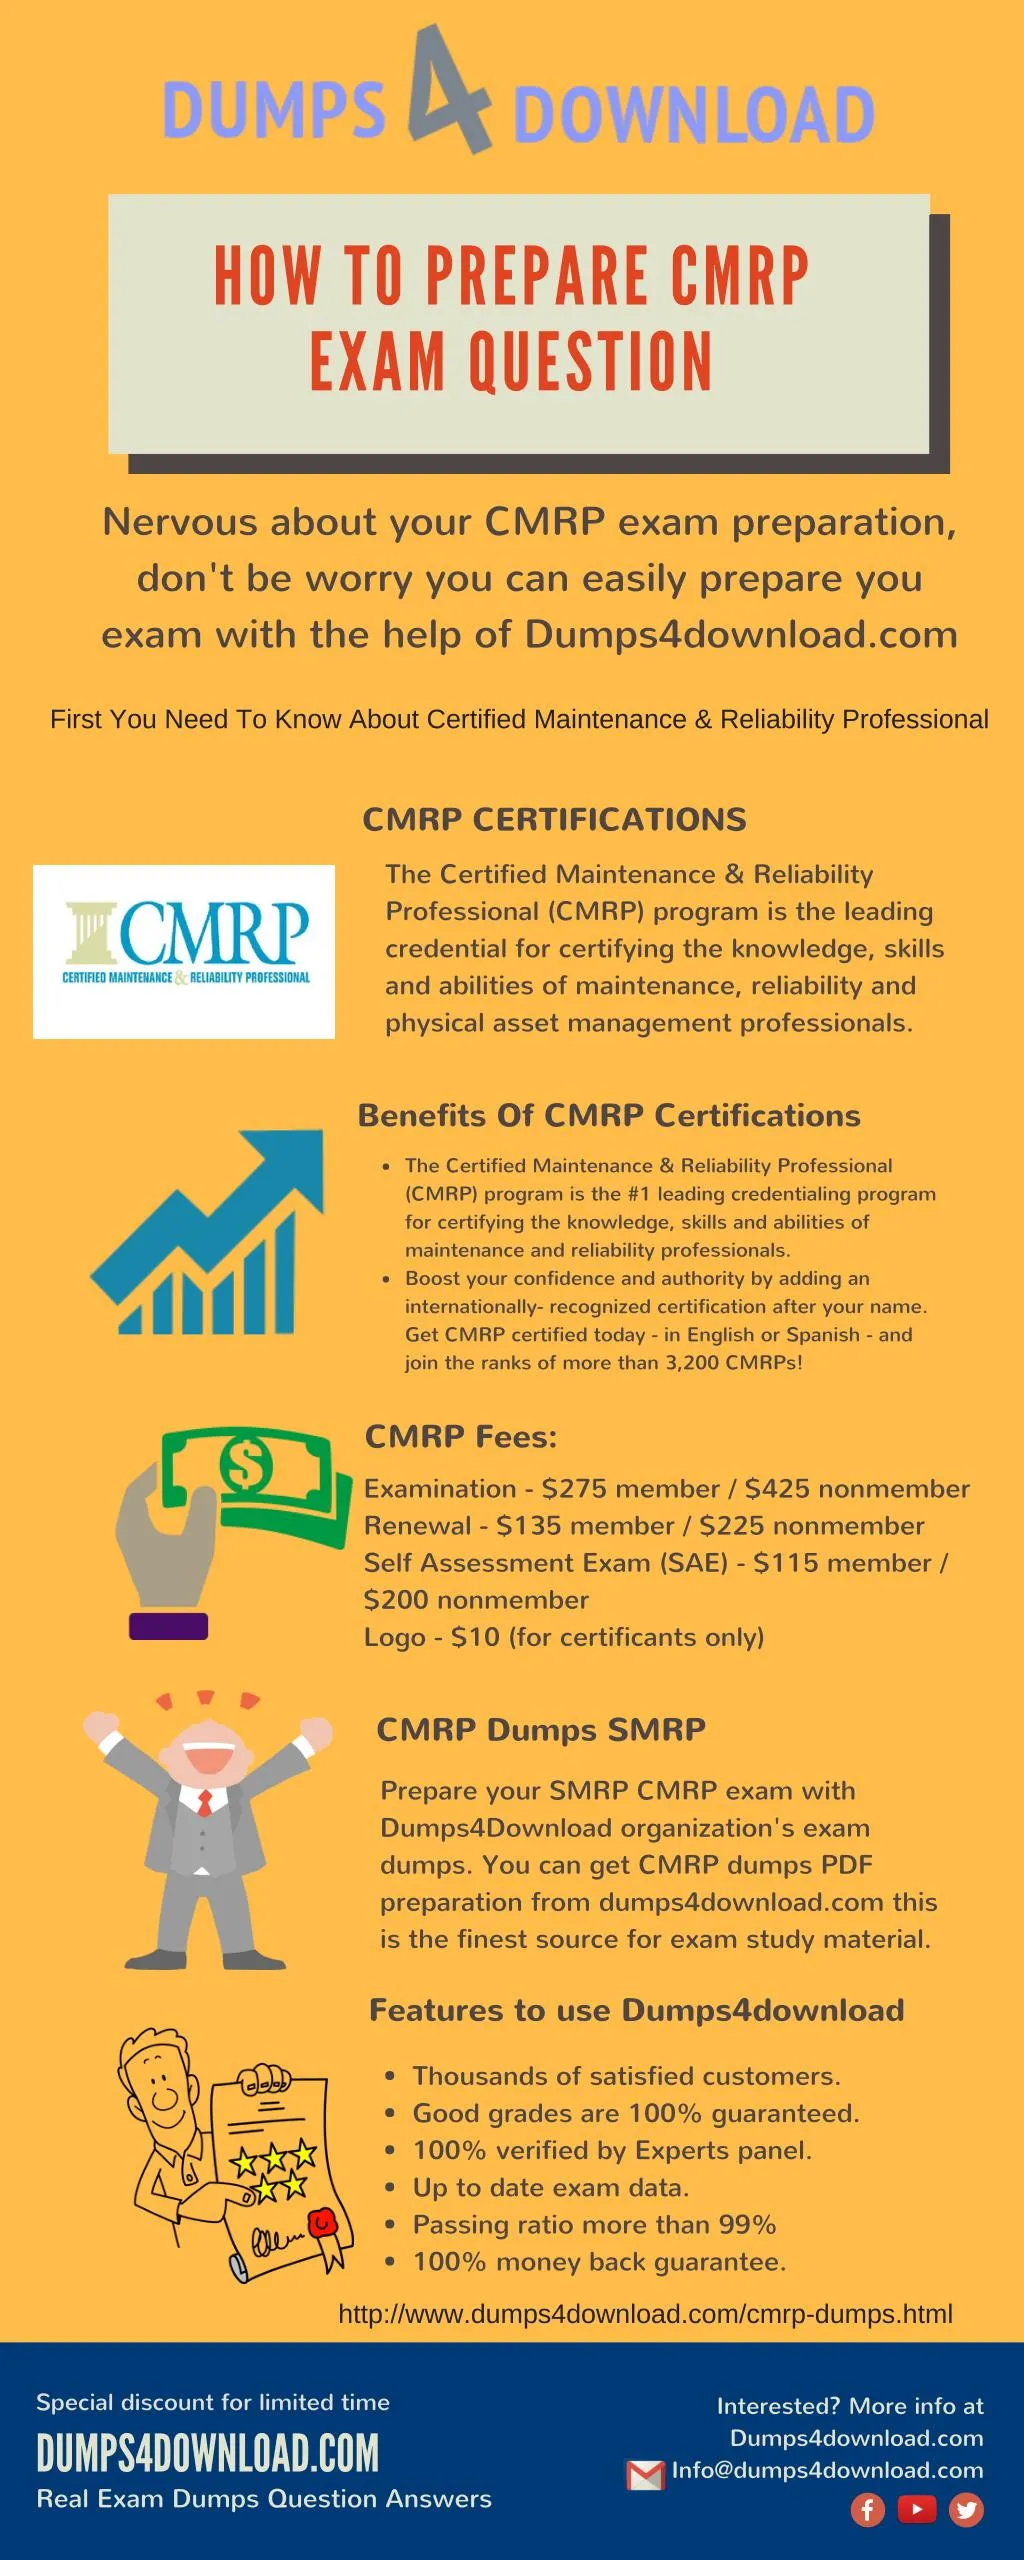 how to prep a re cmrp ex a m question